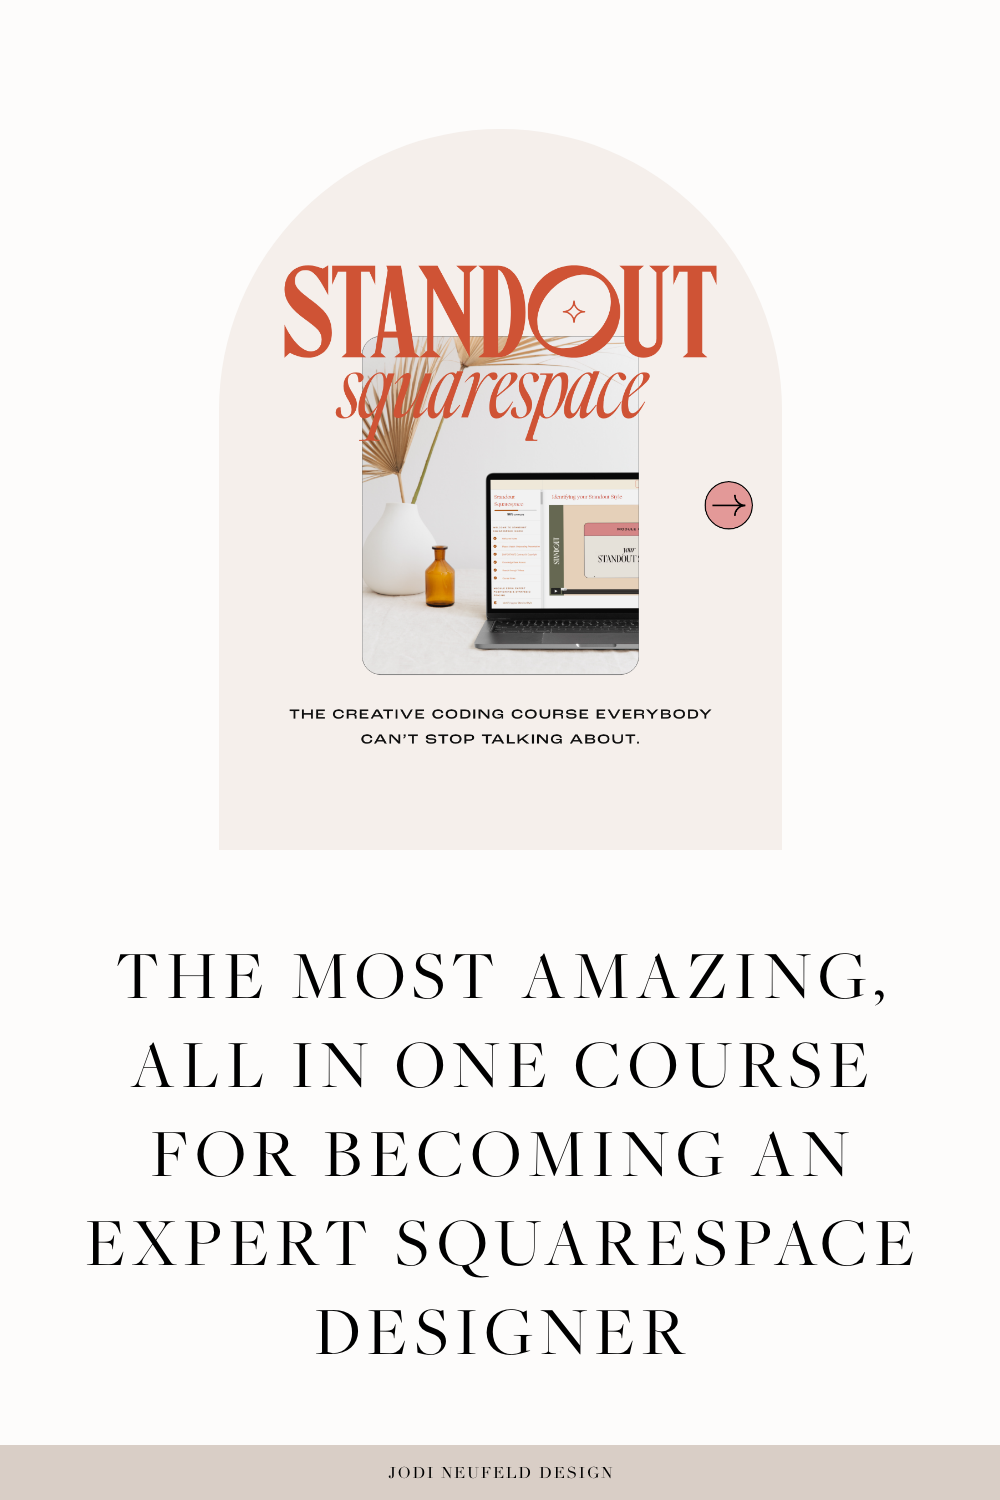 The best course for learning how to become a Squarespace Expert by Jodi Neufeld Design